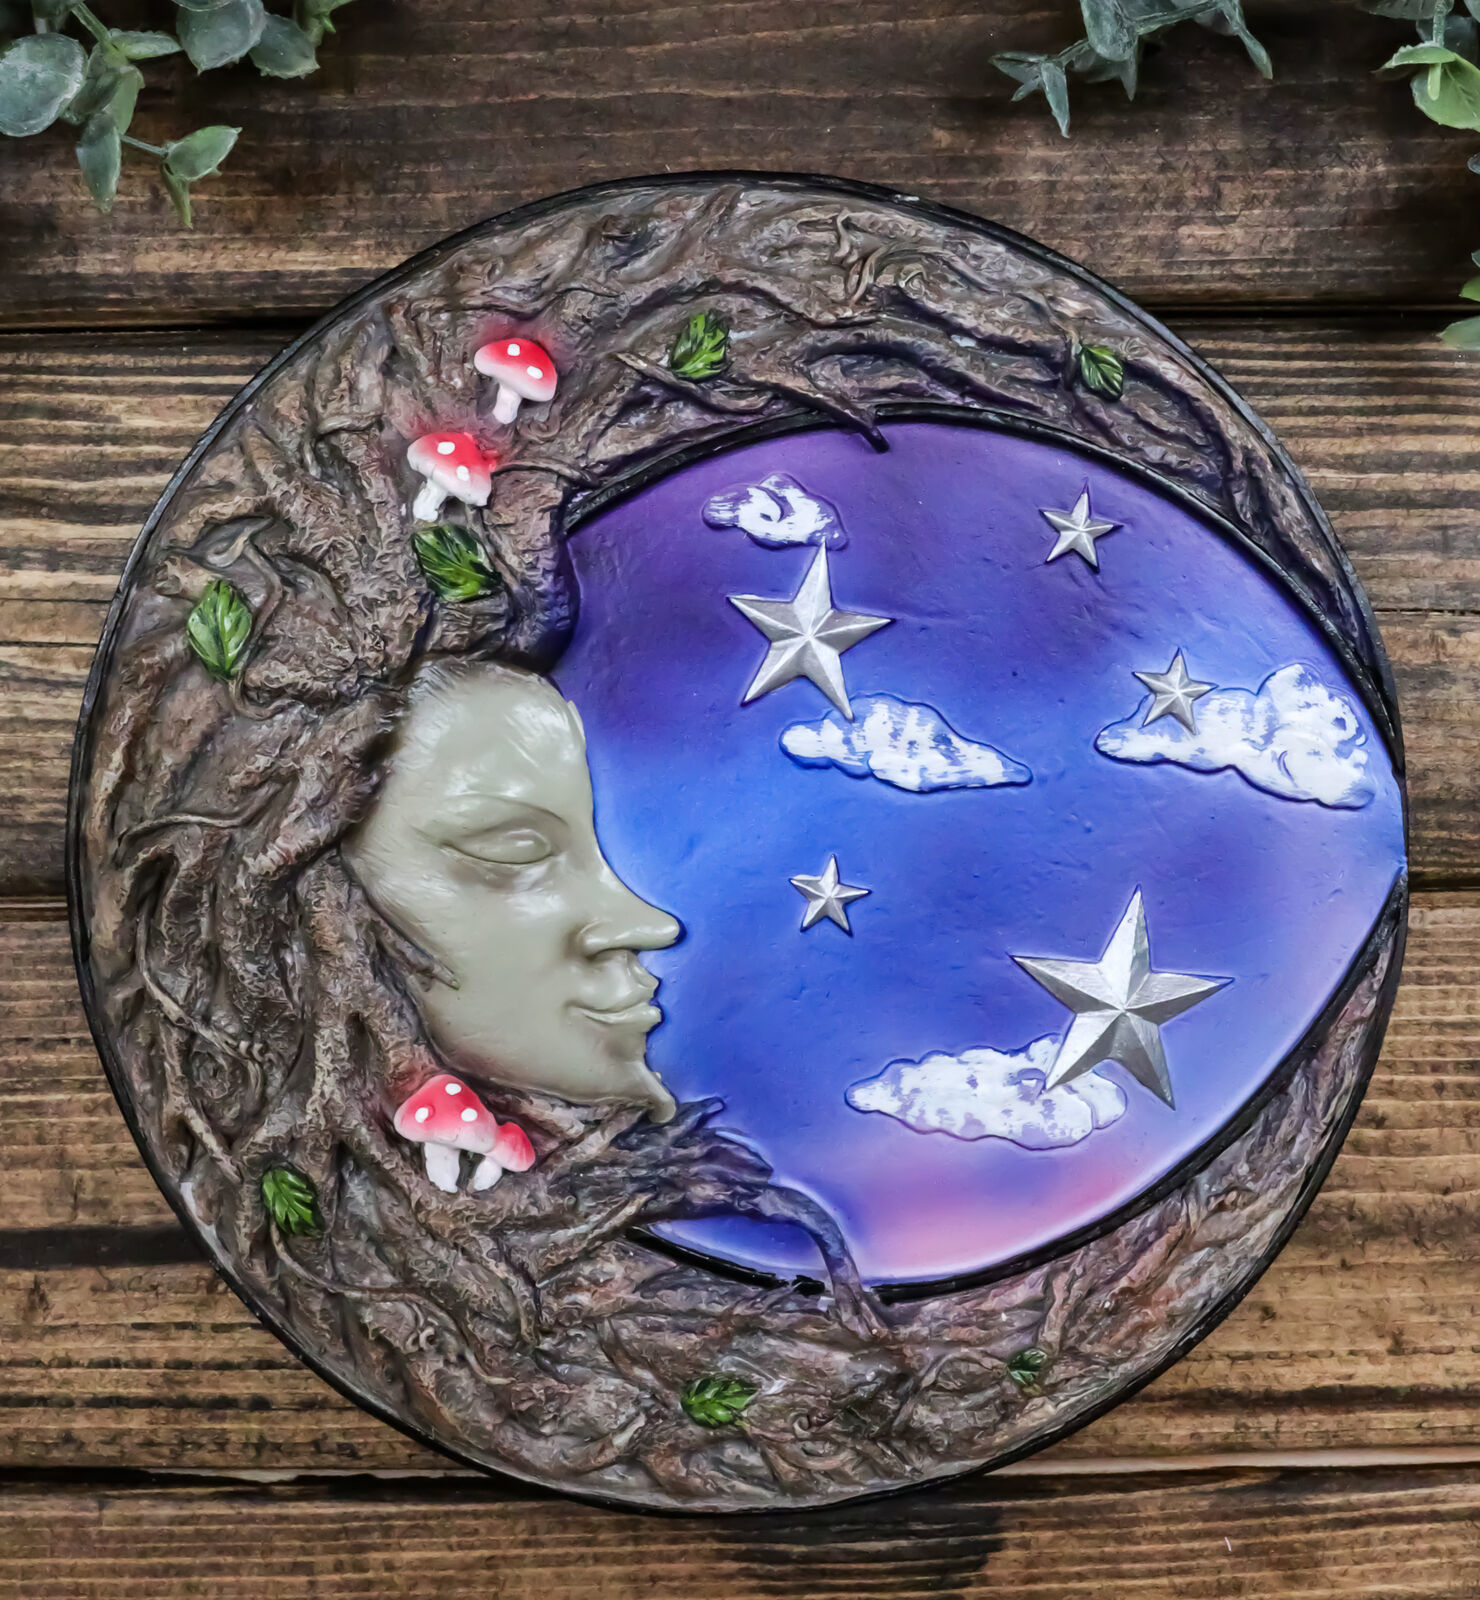 Wicca Tree Woman Greenman Ent Crescent Moon Starry Night Decorative Wall Plaque